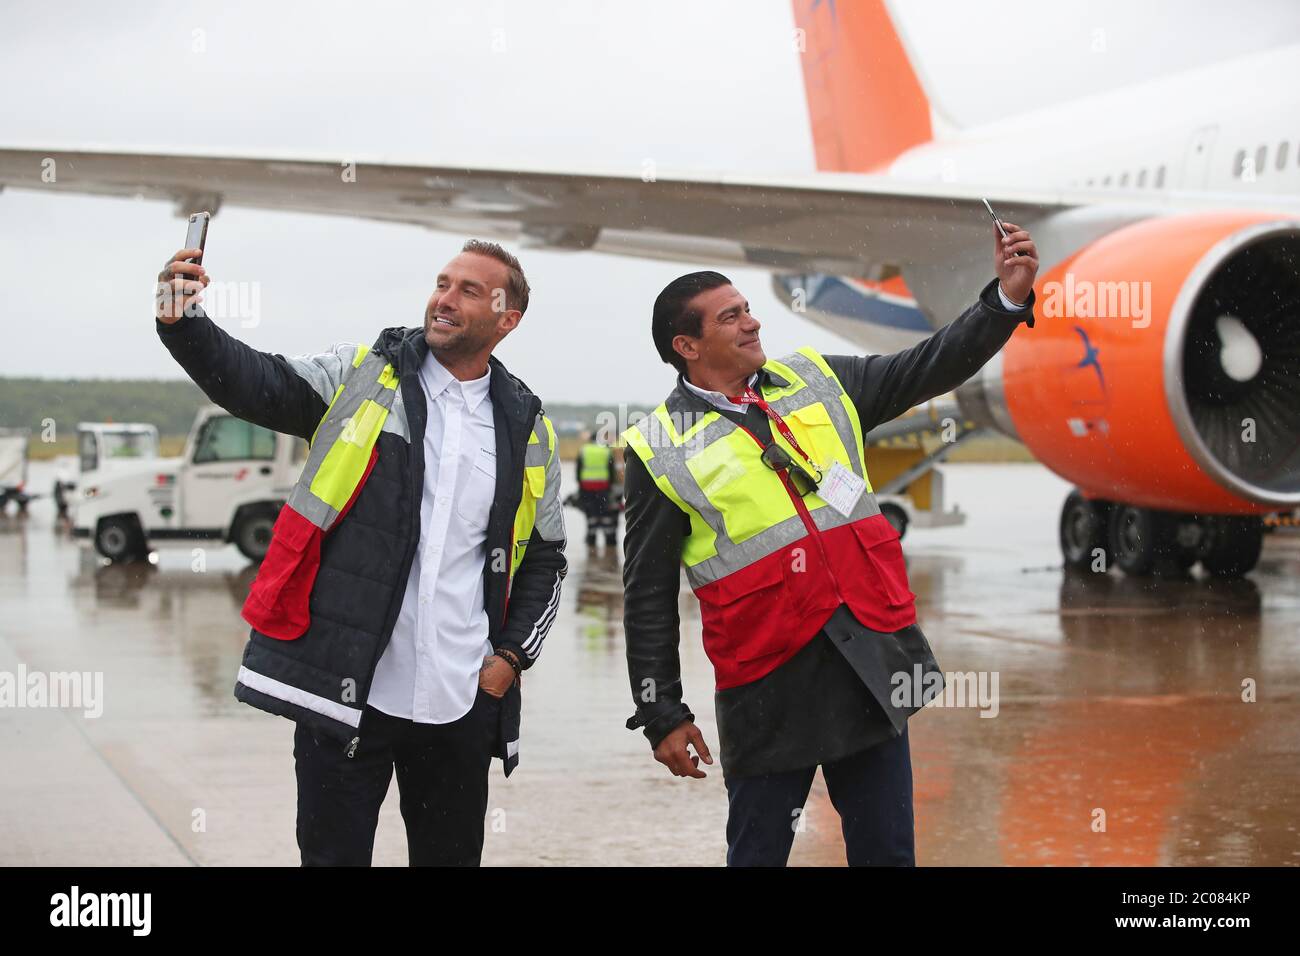 Calum Best (left) and Tamer Hassan pose for photographs as boxes of Personal Protection Equipment (PPE) are unloaded from a plane at Robin Hood Airport in Doncaster, South Yorkshire. ??30,000 worth of PPE has been donated to the Mask Our Heroes charity, which was set up by entrepreneur Matthew McGahan in the wake of the coronavirus outbreak to help supply frontline NHS and health workers with the protective equipment they need. Stock Photo